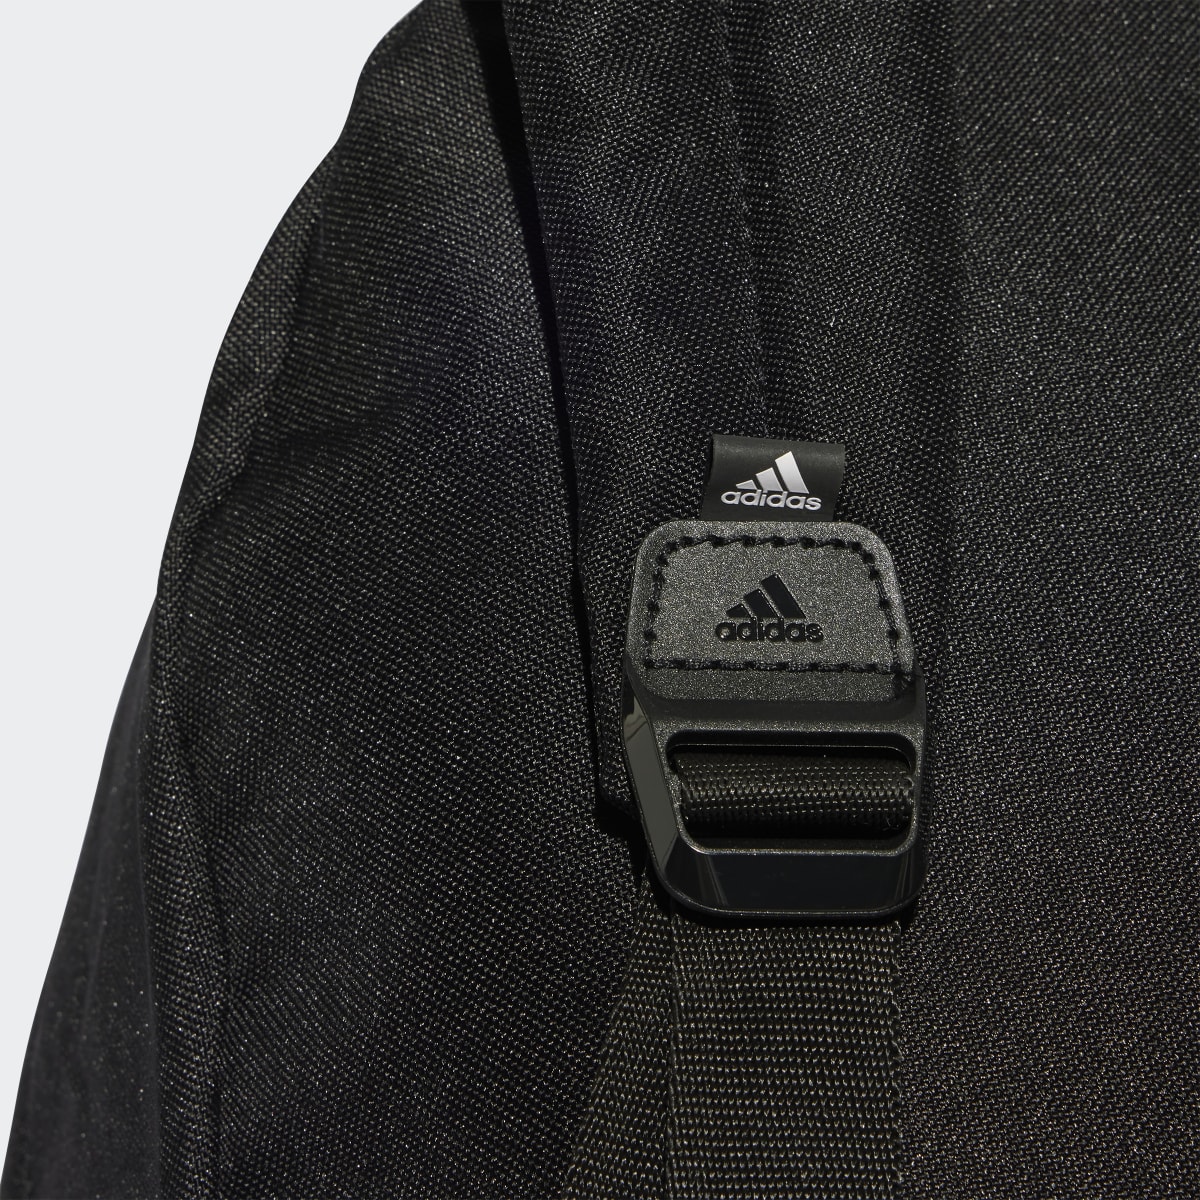 Adidas Classic Badge of Sport Backpack. 7